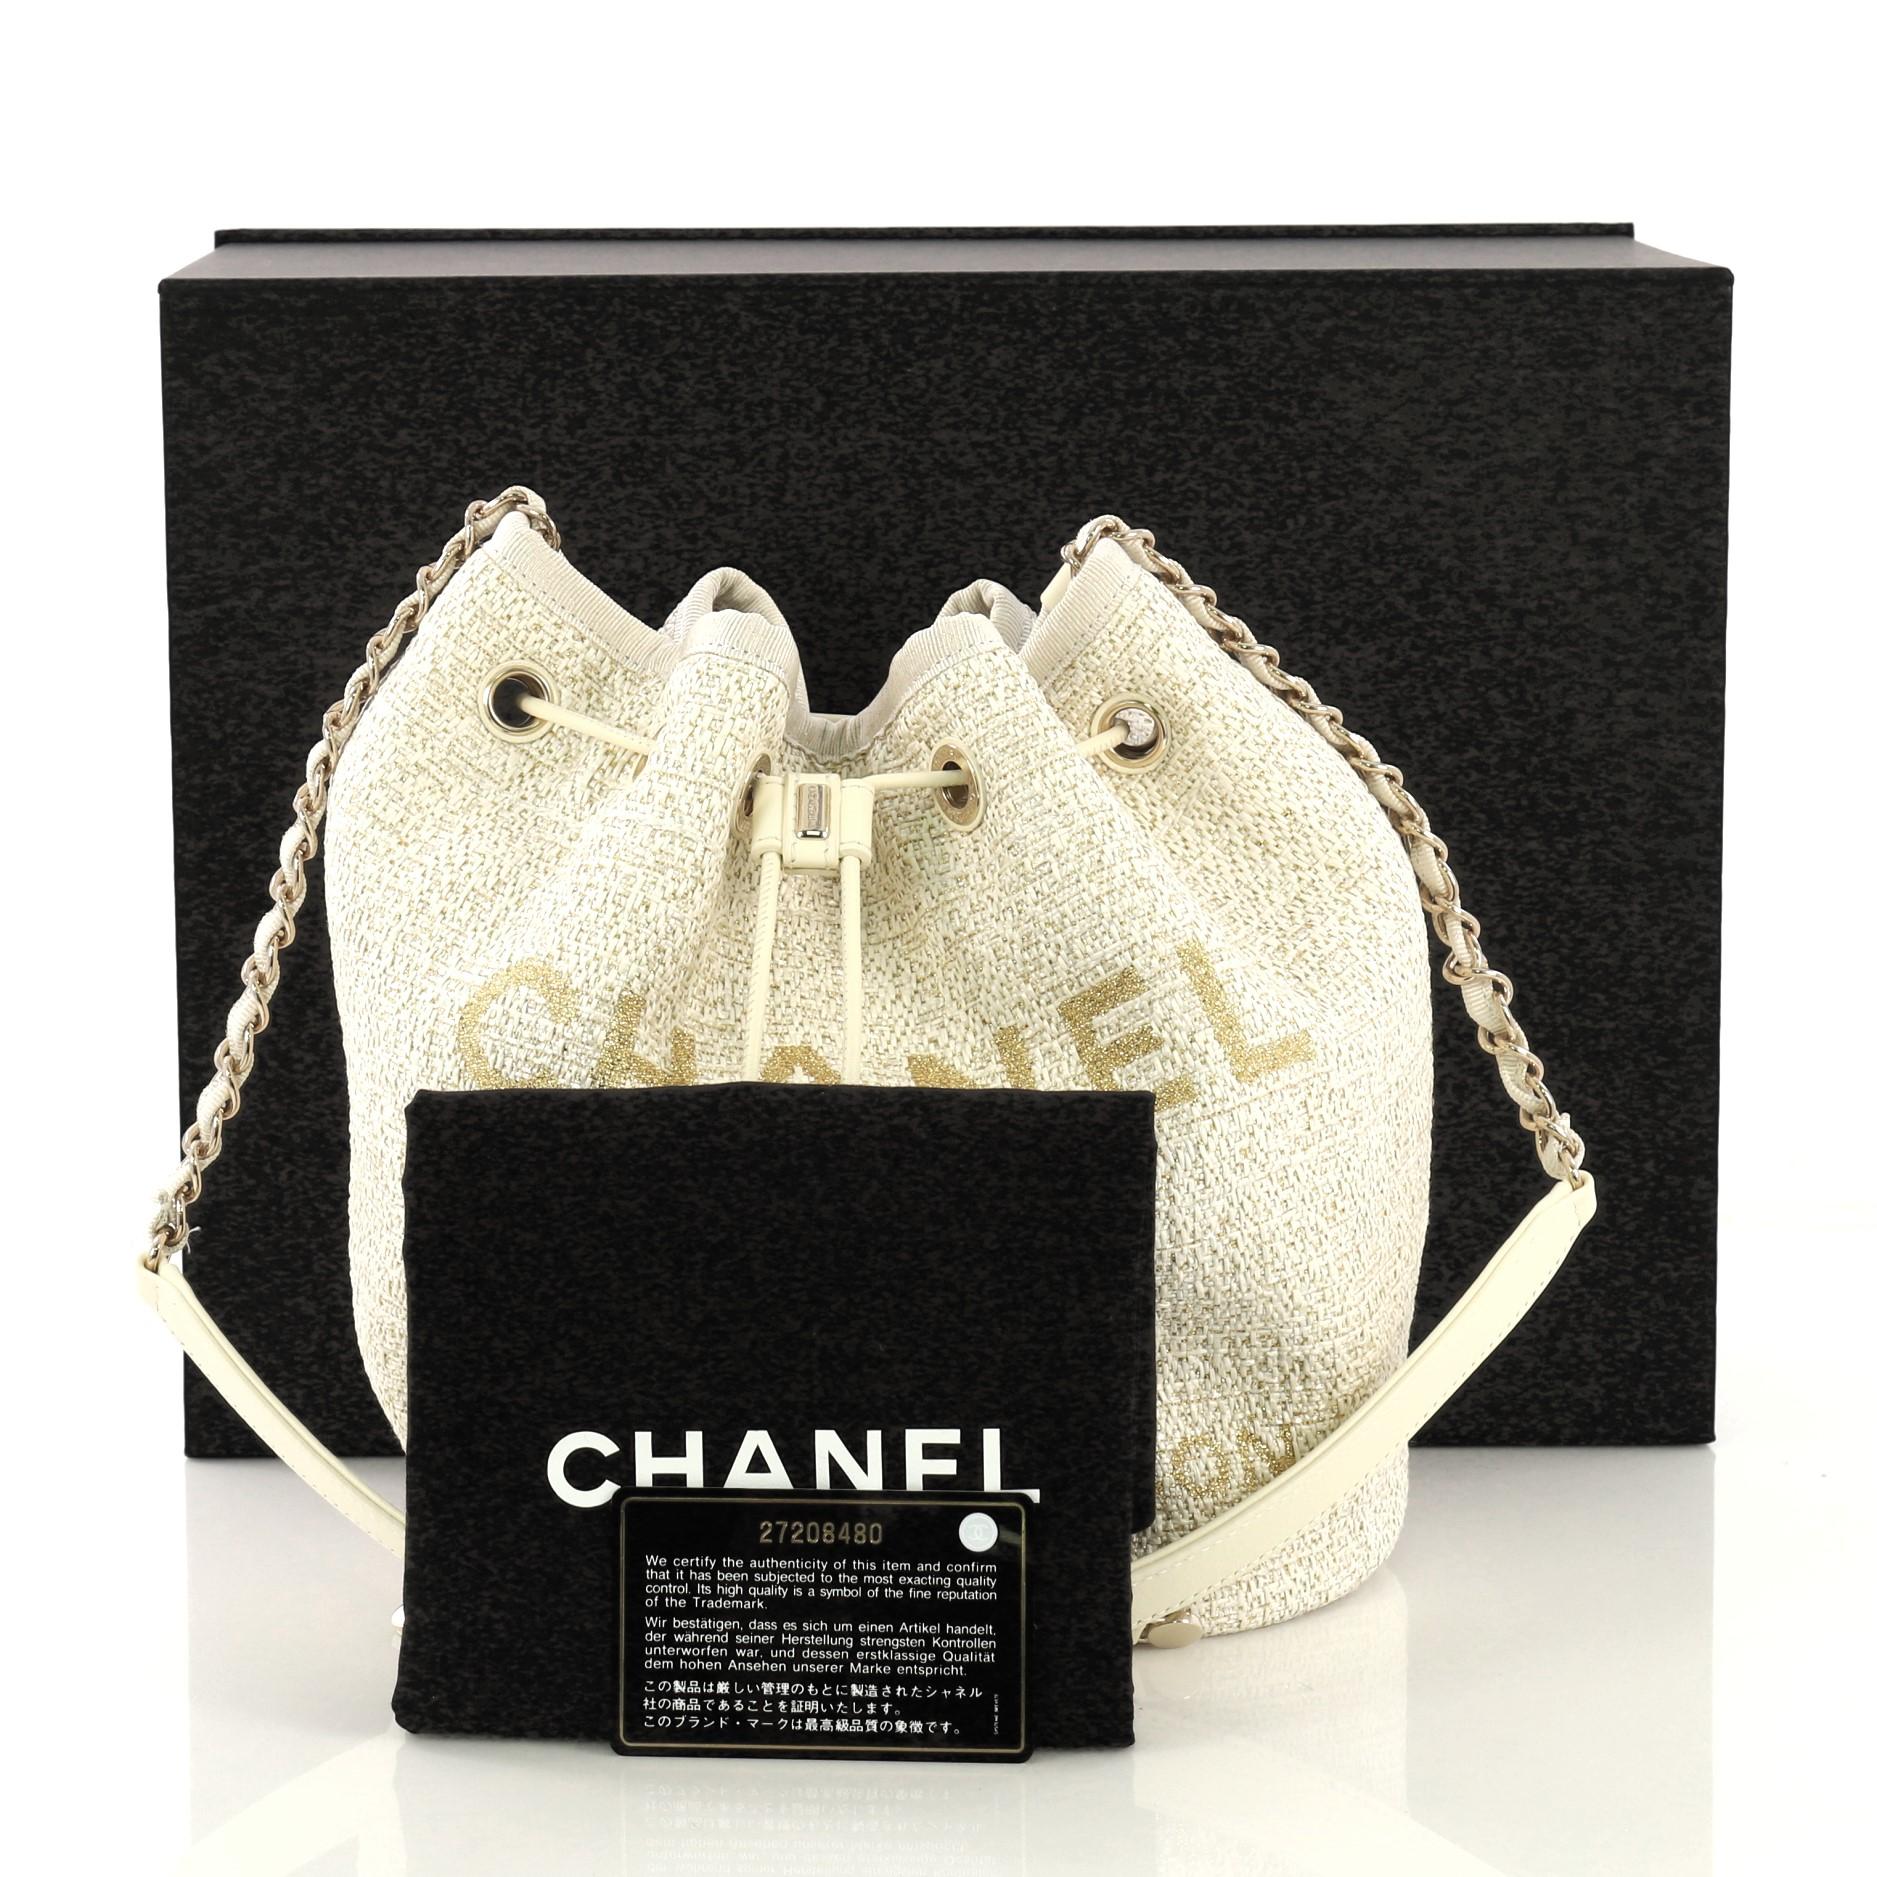 This Chanel Deauville Drawstring Bucket Bag Raffia Medium, crafted in white and gold raffia, features woven-in canvas chain strap, CC logo with Chanel's famous Parisian store address on front, and gold-tone hardware. Its drawstring closure opens to